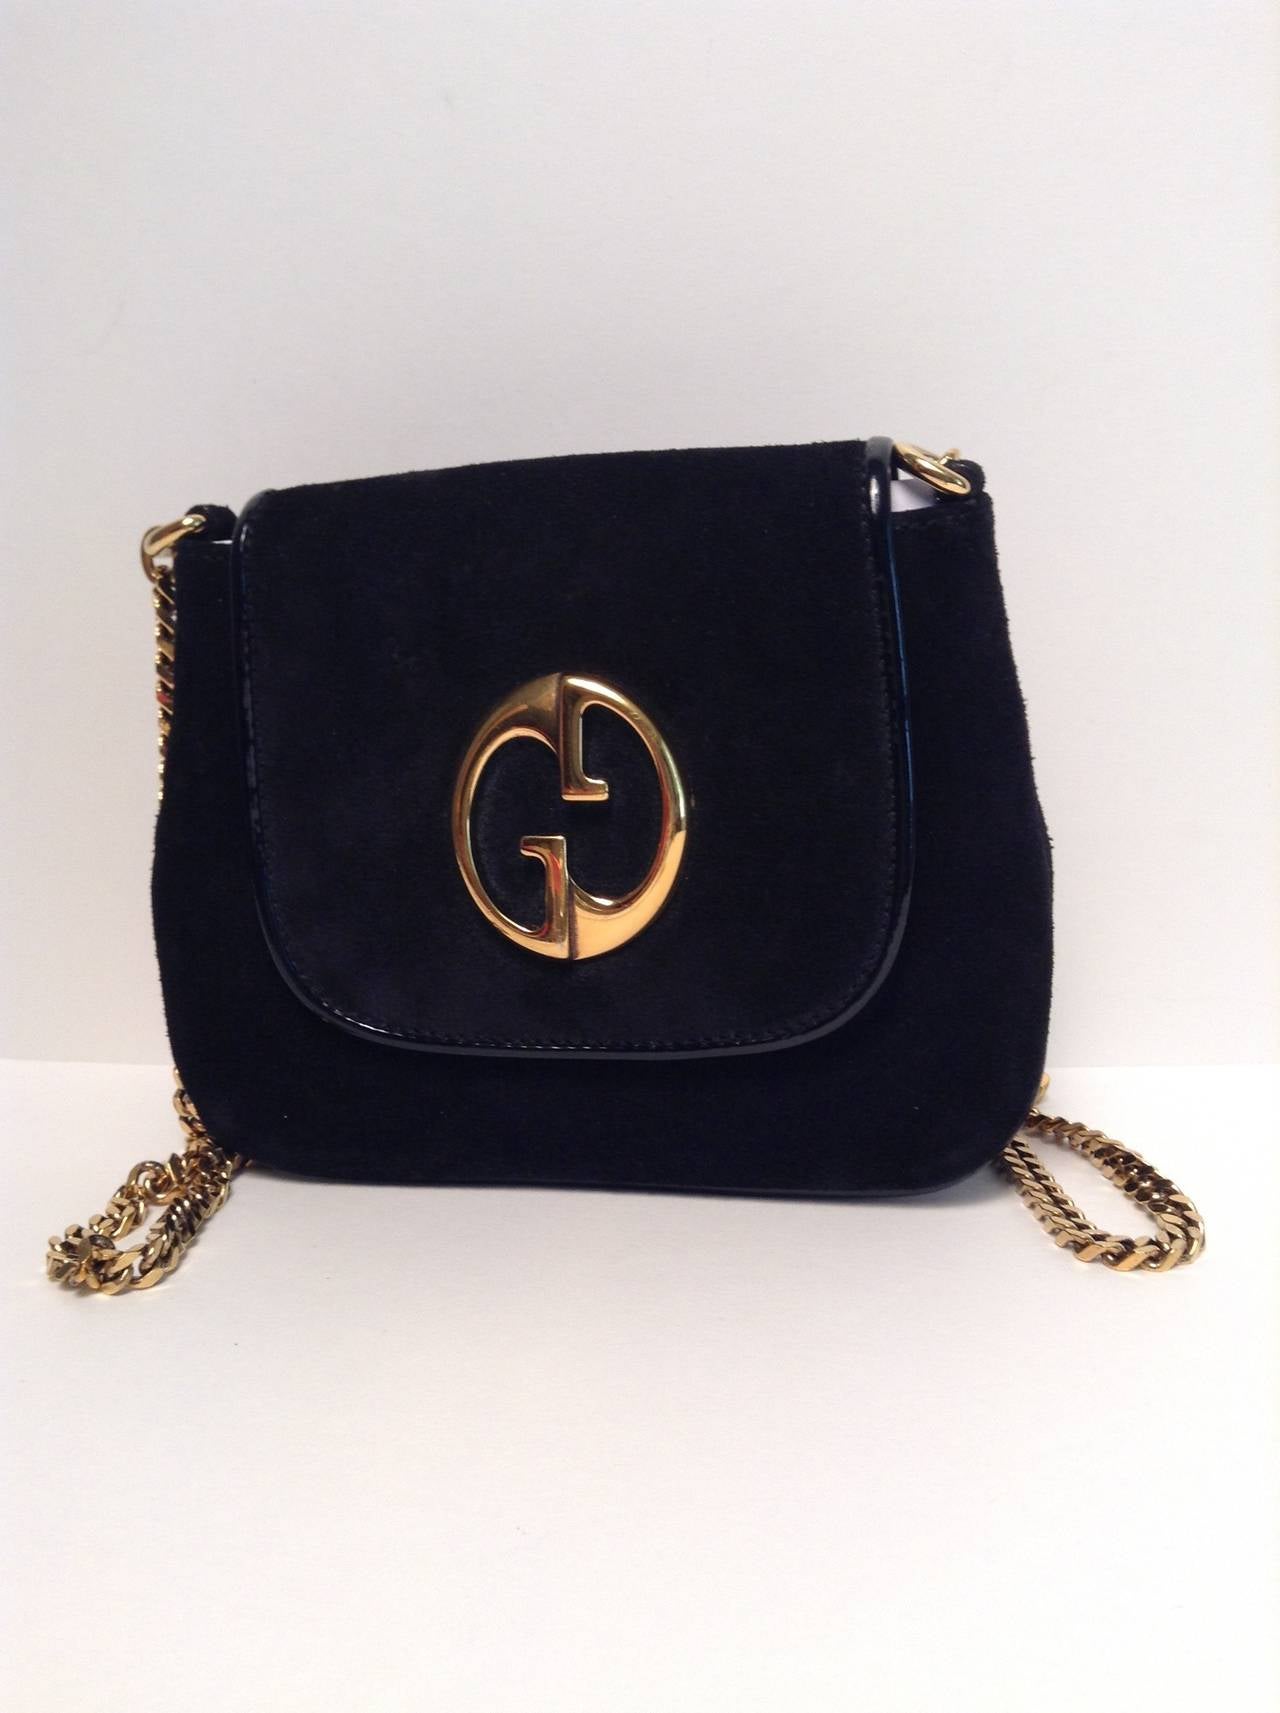 Gucci Black Suede Gold Chain Bag 1973 Reissue In Excellent Condition In Toronto, Ontario